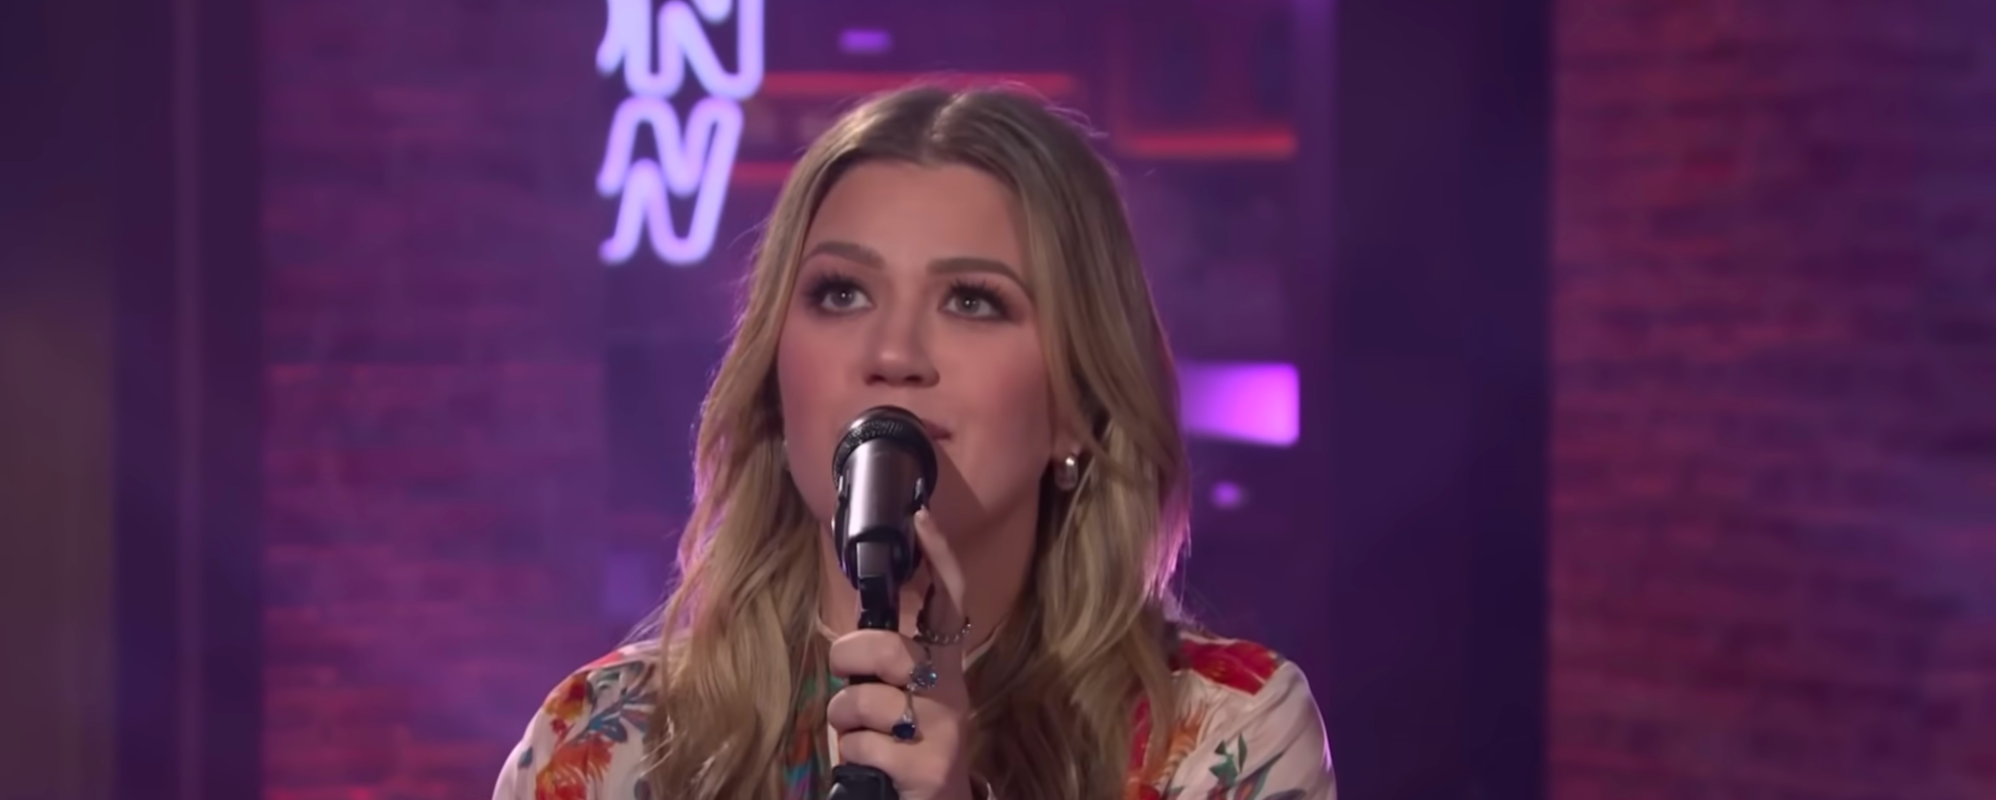 Watch: Kelly Clarkson Delivers an Intoxicating Cover of Lainey Wilson’s “Watermelon Moonshine” in Latest Kellyoke Segment